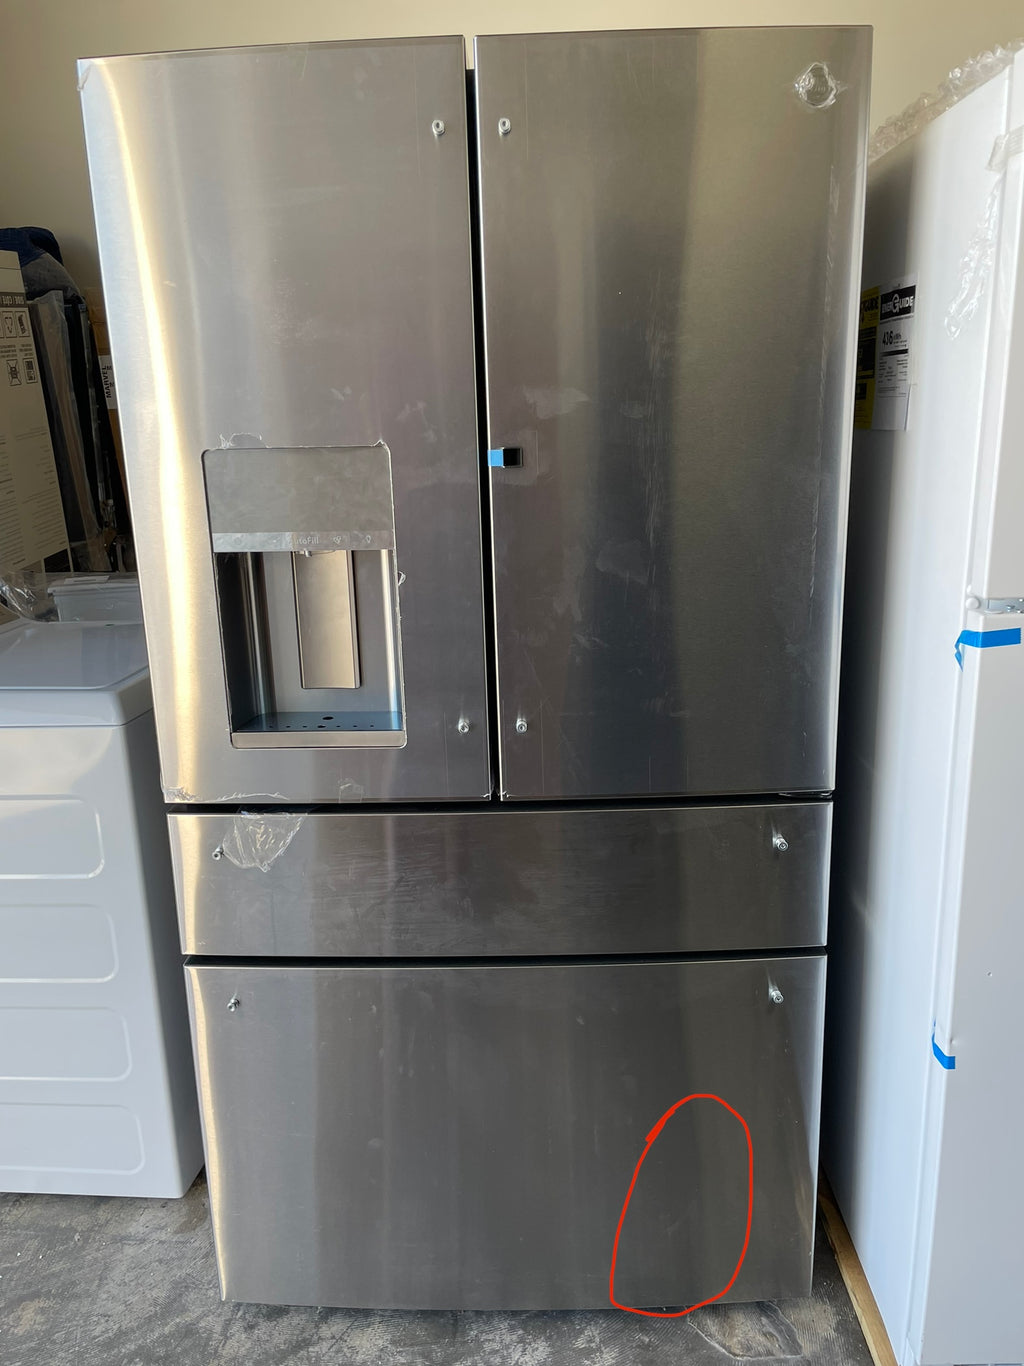 GE Profile PVD28BYNFS 36 Stainless 4-Door French Door Refrigerator #124392